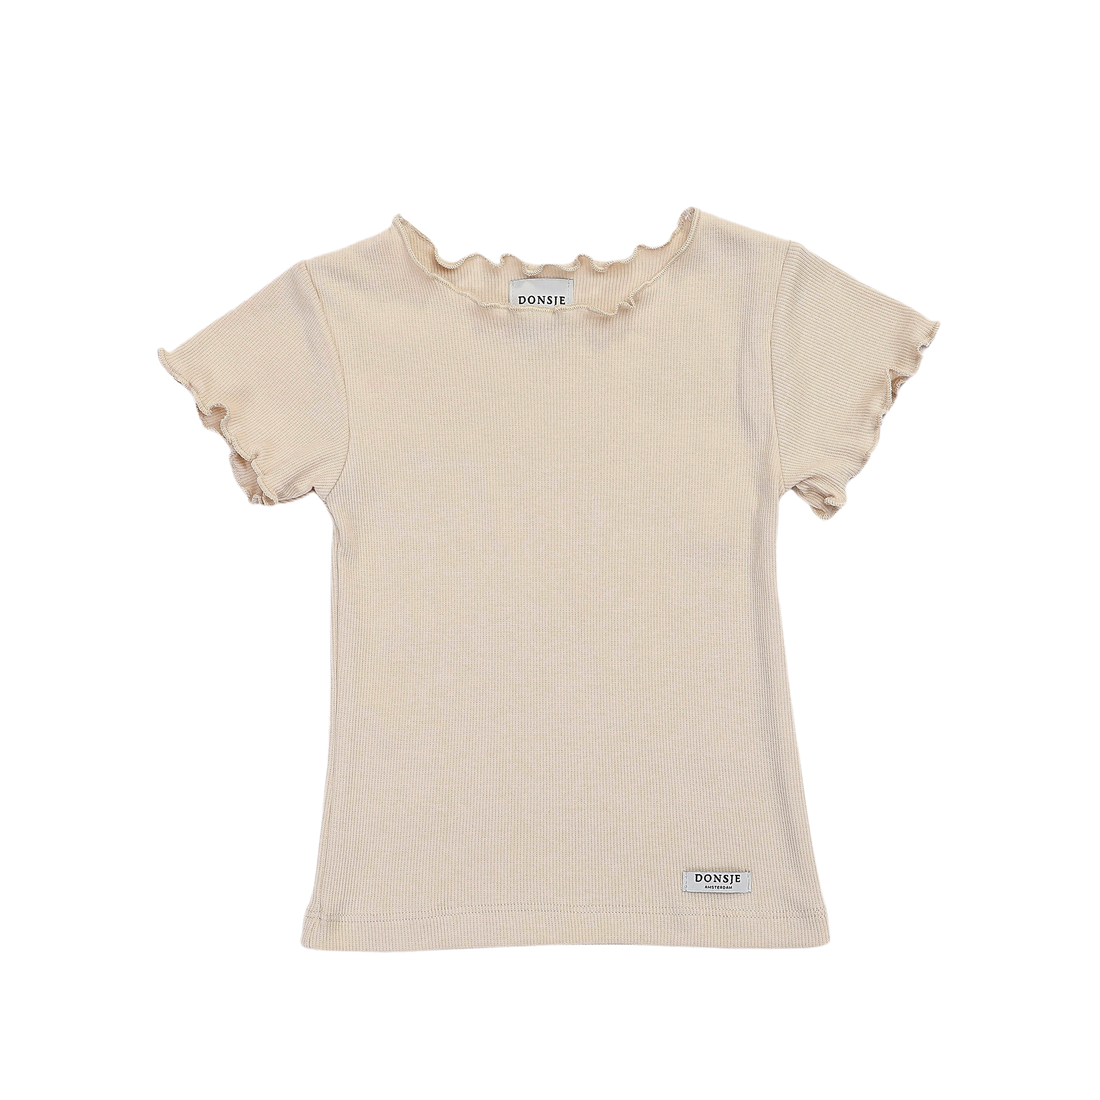 Eloise Shirt | Frosted Cream